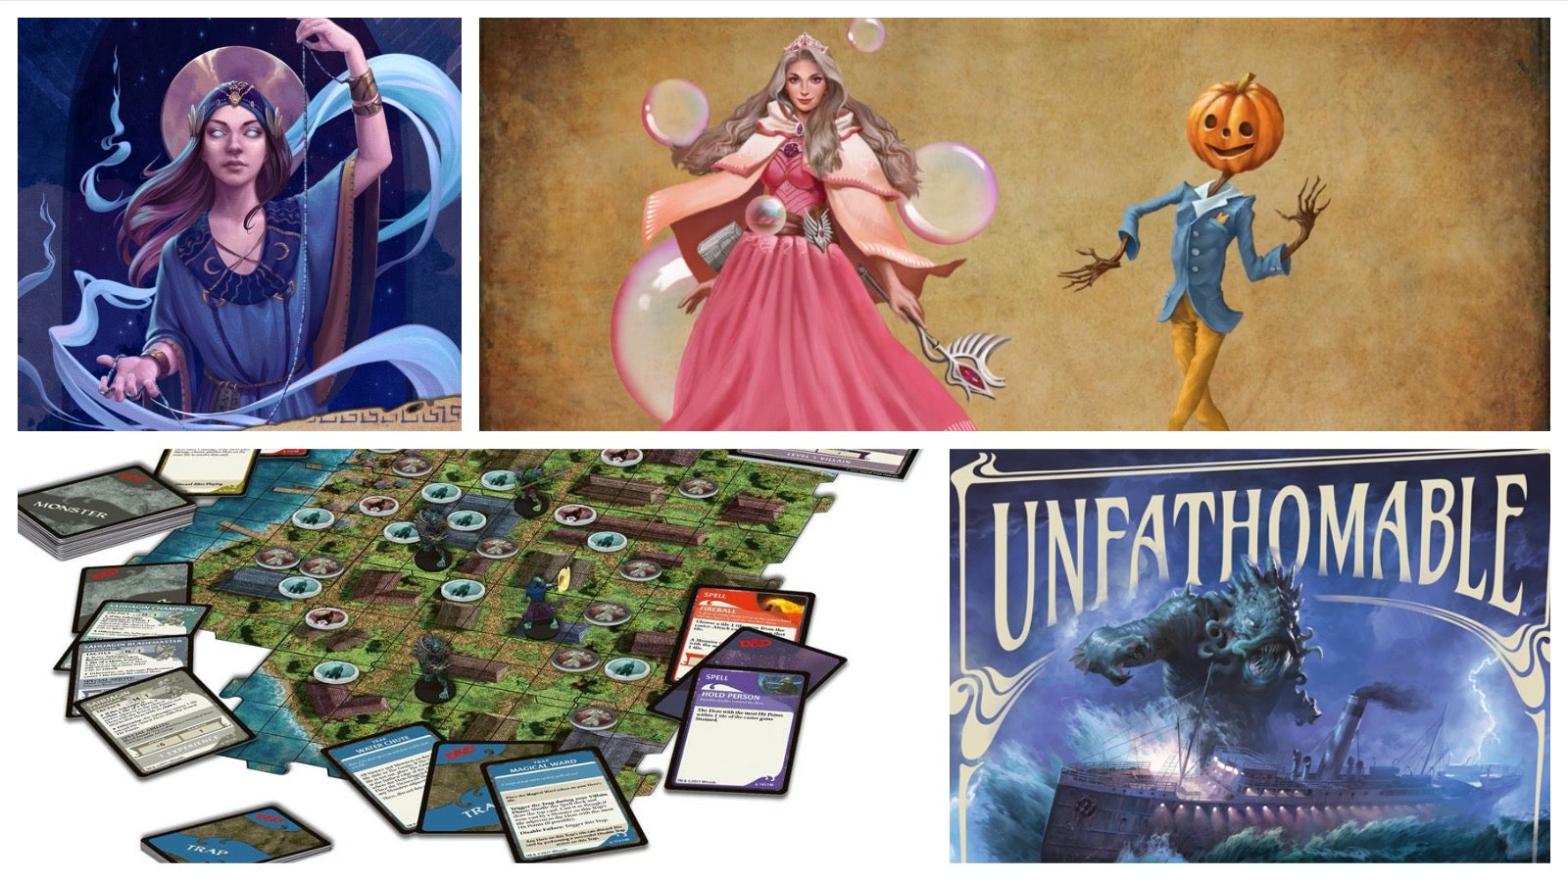 Clockwise from left: The Oracle Story Generator, Adventures in Oz, Unfathomable, and Ghosts of Saltmarsh board game.  (Screenshot: Nord Games,Screenshot: Double Critical,Image: Fantasy Flight Games,Image: WizKids)